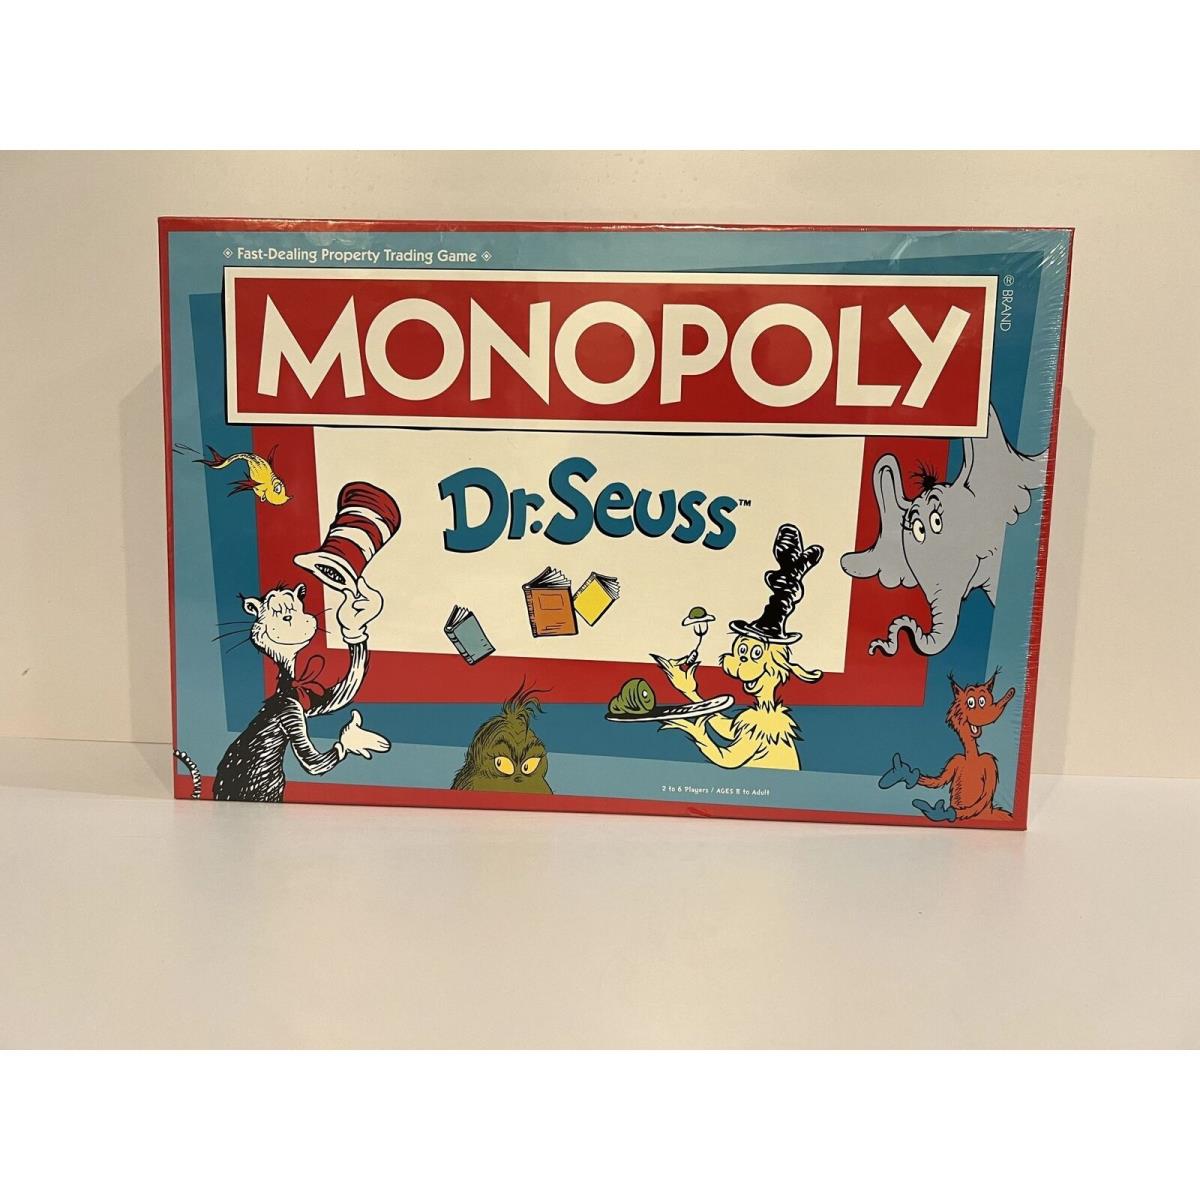 Monopoly: Dr. Seuss Collectible Classic Monopoly Game Board